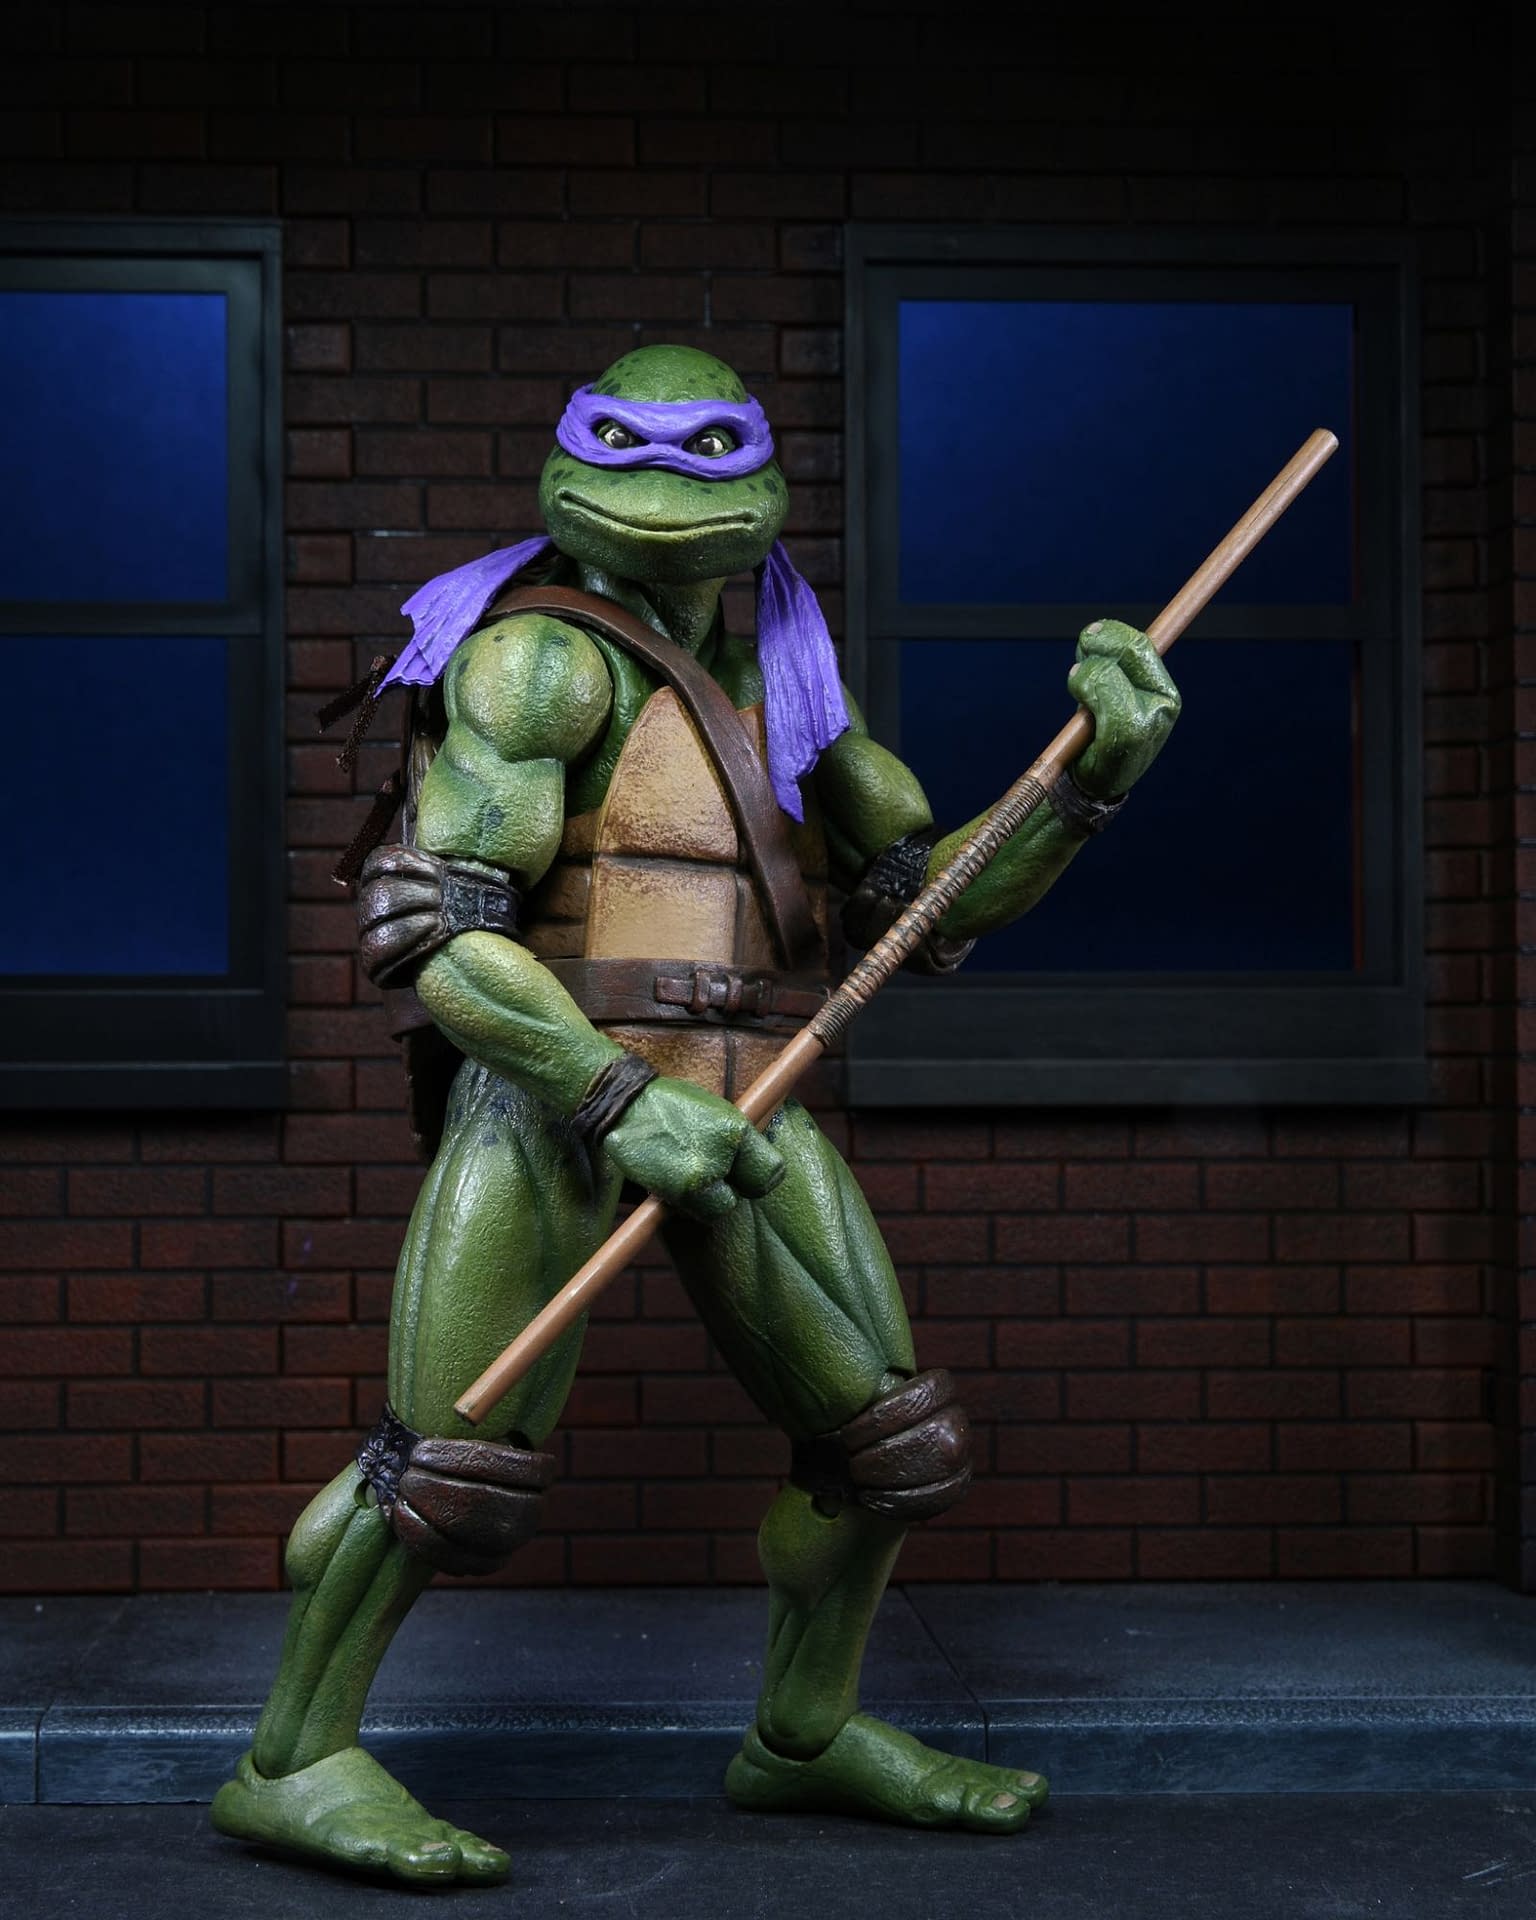 NECA Selling Hard To Get TMNT Figures On Black Friday